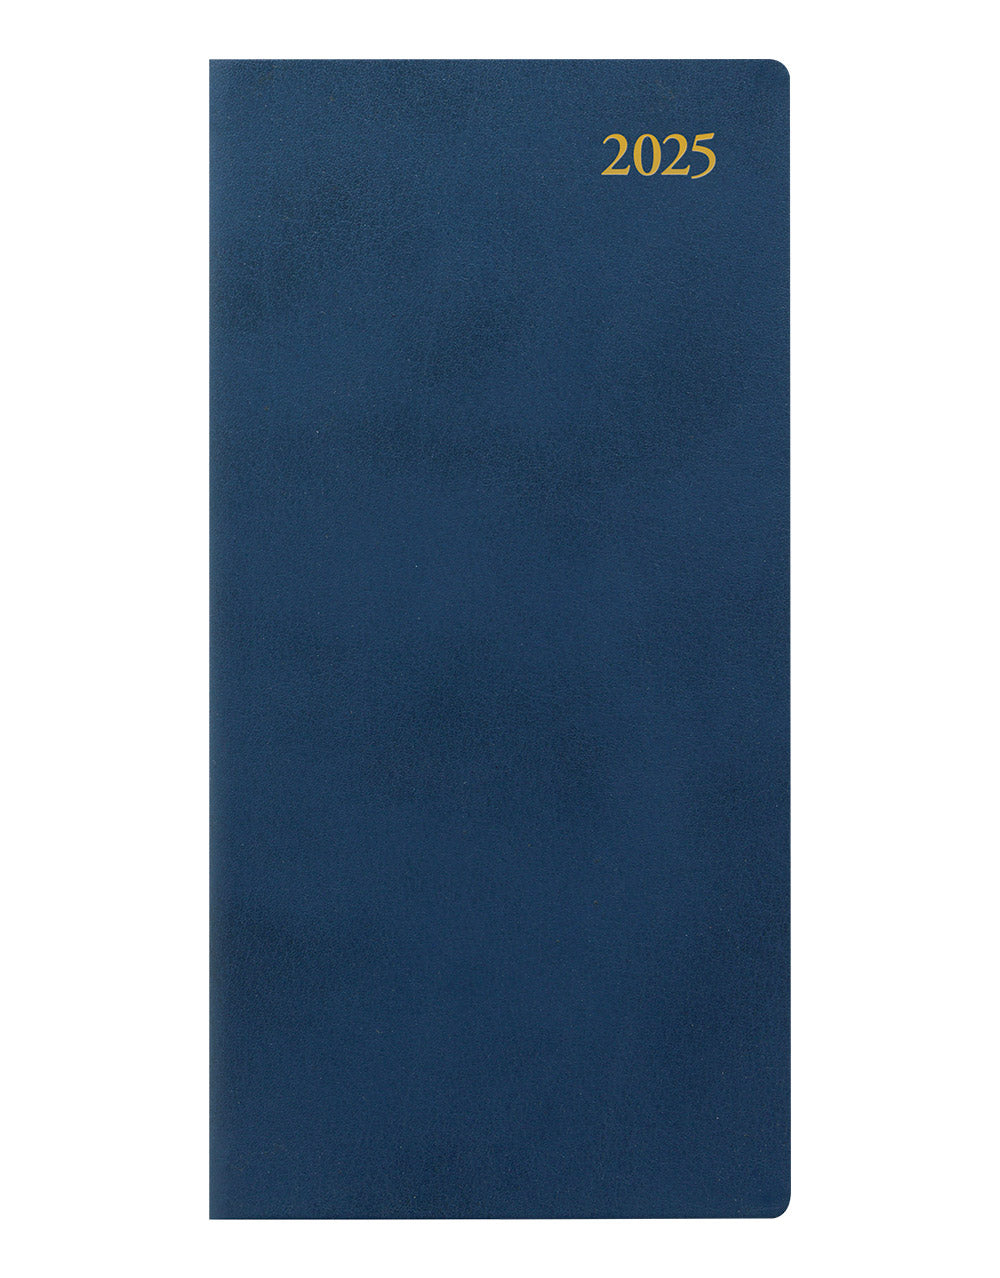 Signature Slim Week to View Leather Diary with Planners 2025 - English 25-C38SUBE#color_signature-blue